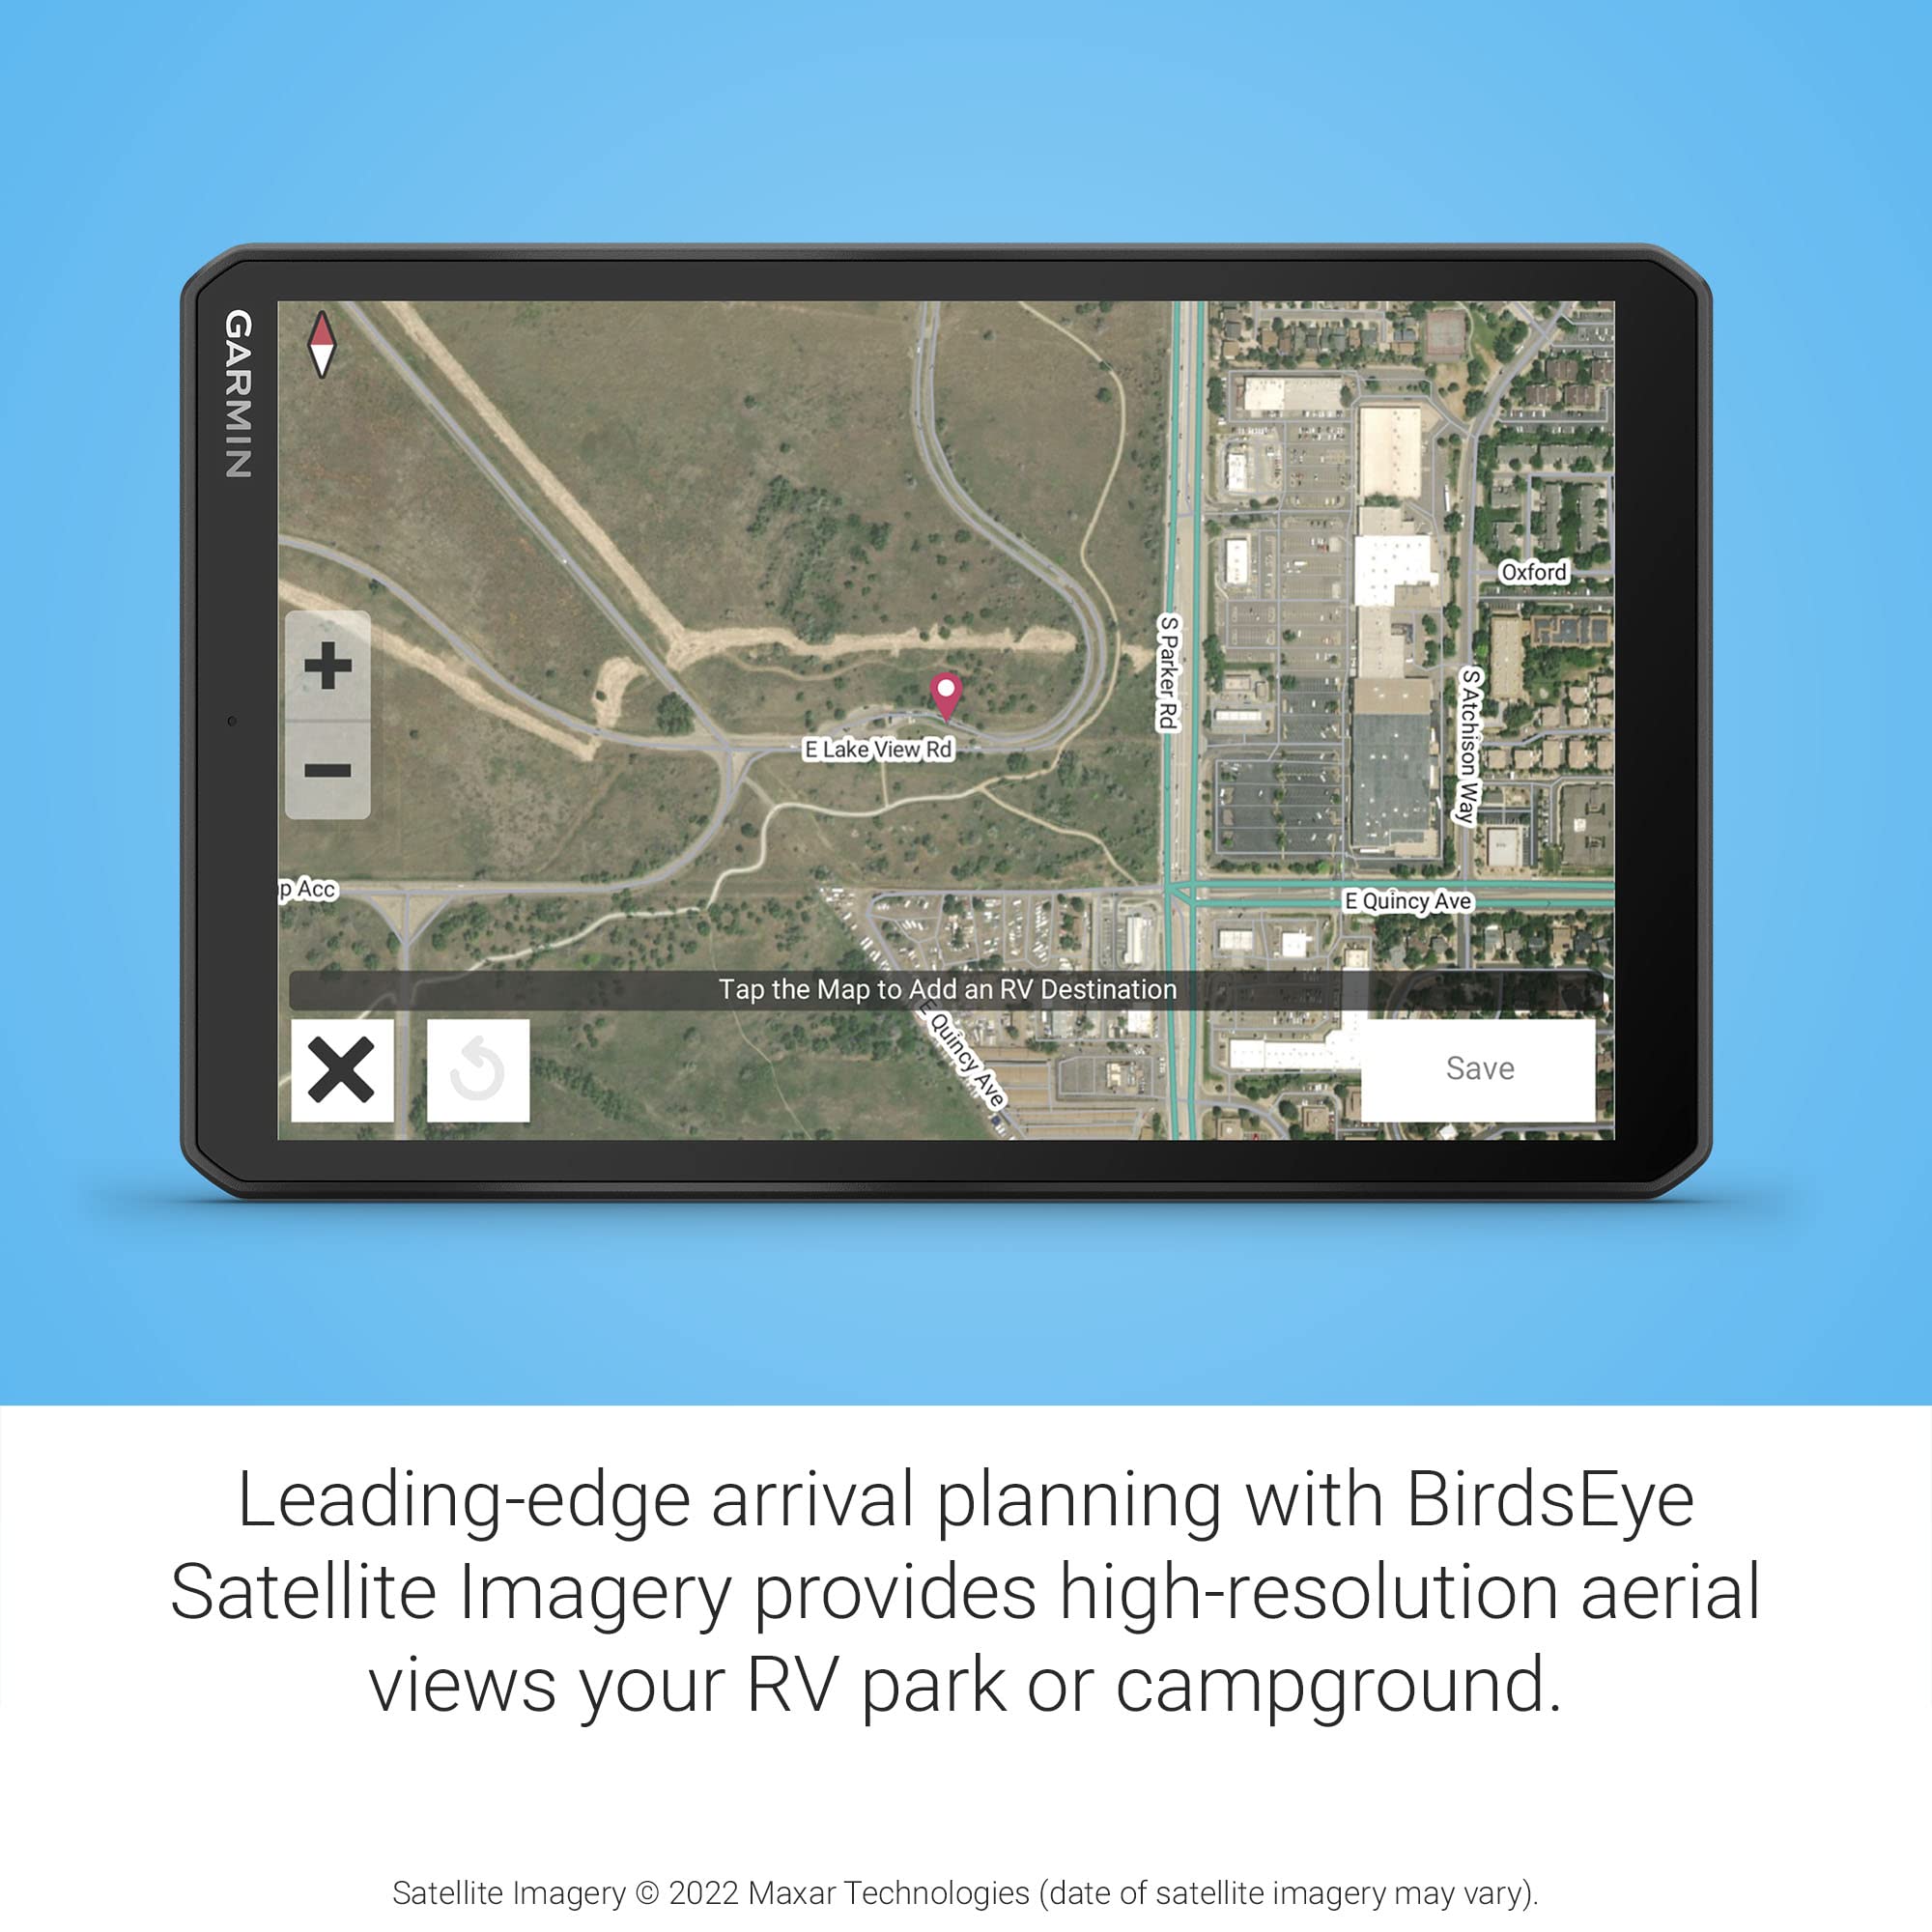 Garmin RV 895, Large, Easy-to-Read 8” GPS RV Navigator, Custom RV Routing, High-Resolution Birdseye Satellite Imagery, Directory of RV Parks and Services, Landscape or Portrait View Display